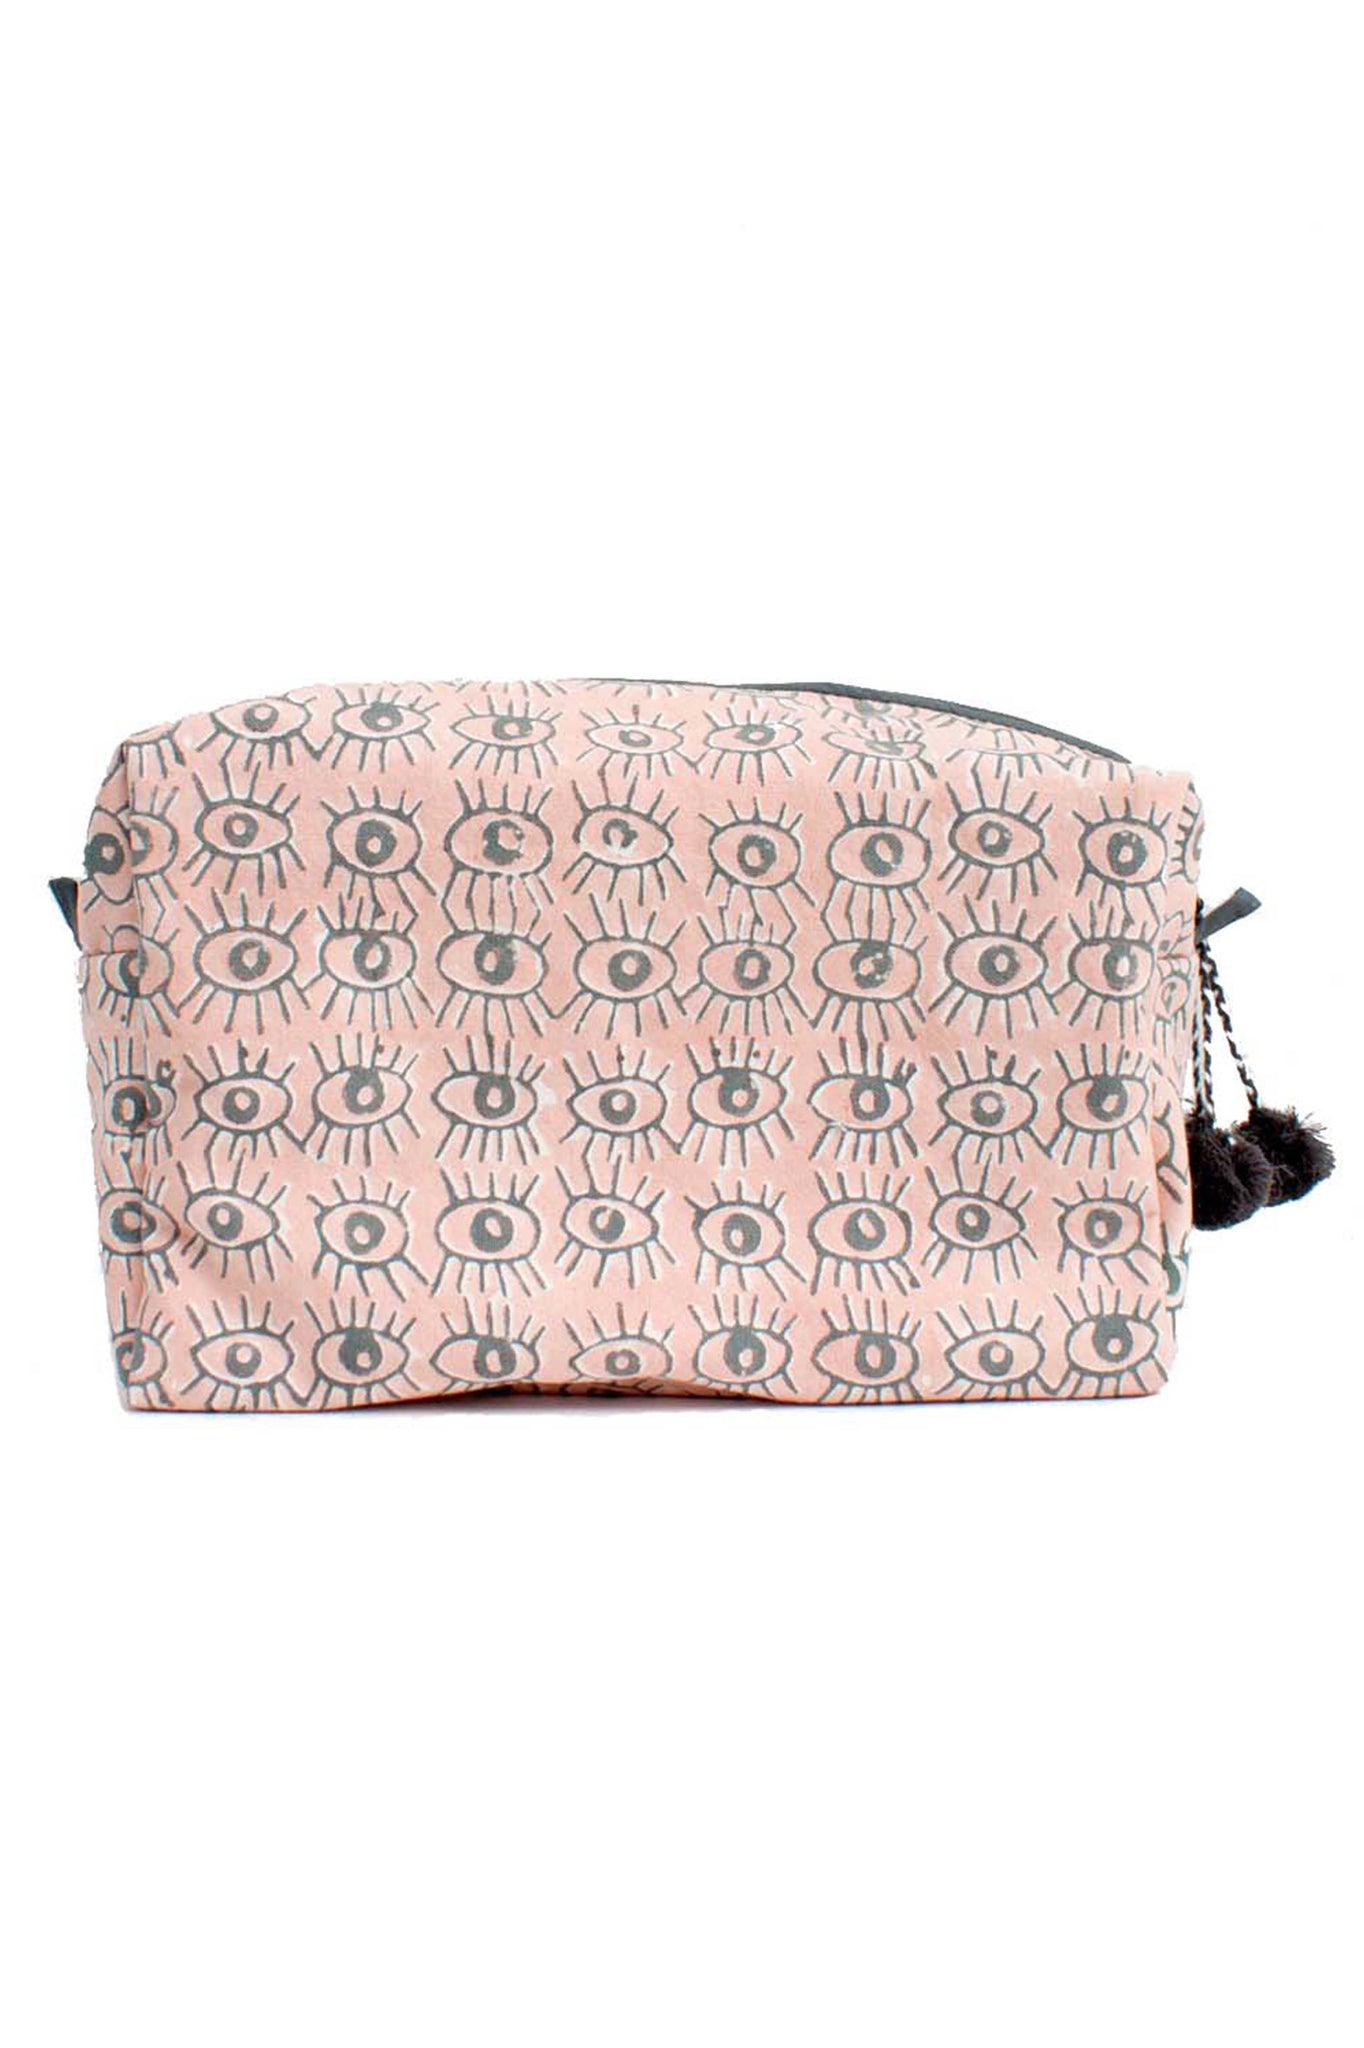 Bohemia Design Eye Print Cosmetic Case. Rectangular gusseted cosmetic bag made from lightweight cotton and finished with tonal pom pom detailing on the zipper. Block printed with evil eye pattern. 10 inches by 6 inches. 4 inch gusset. Colors Blush Duck Blue. 100% Cotton Canvas with Waterproof Lining. One size.